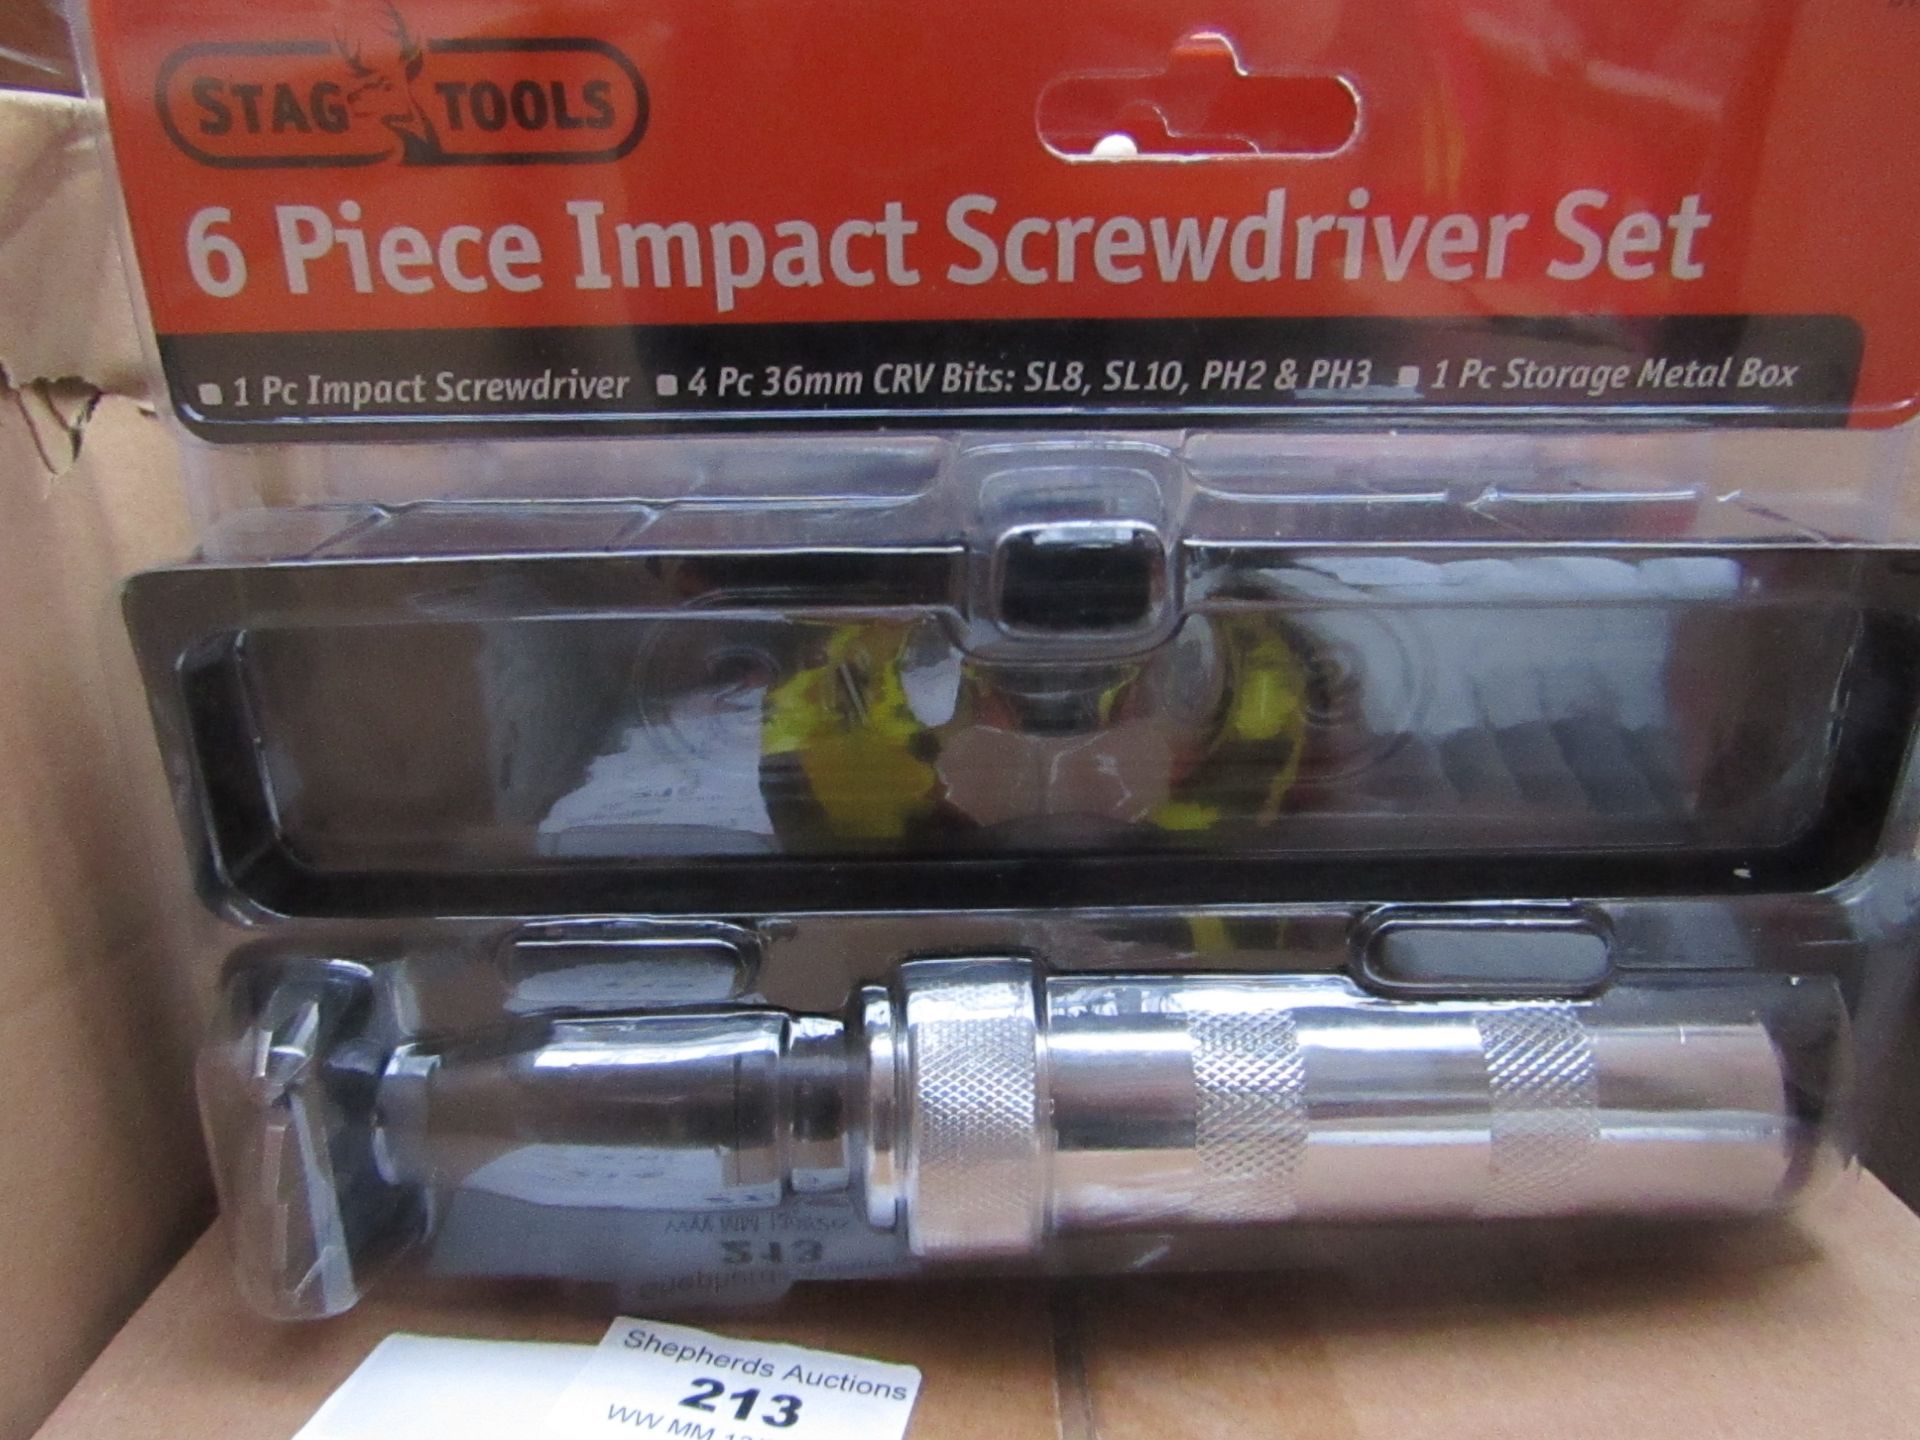 Stag - 6 piece impact screwdriver set - New & Packaged.